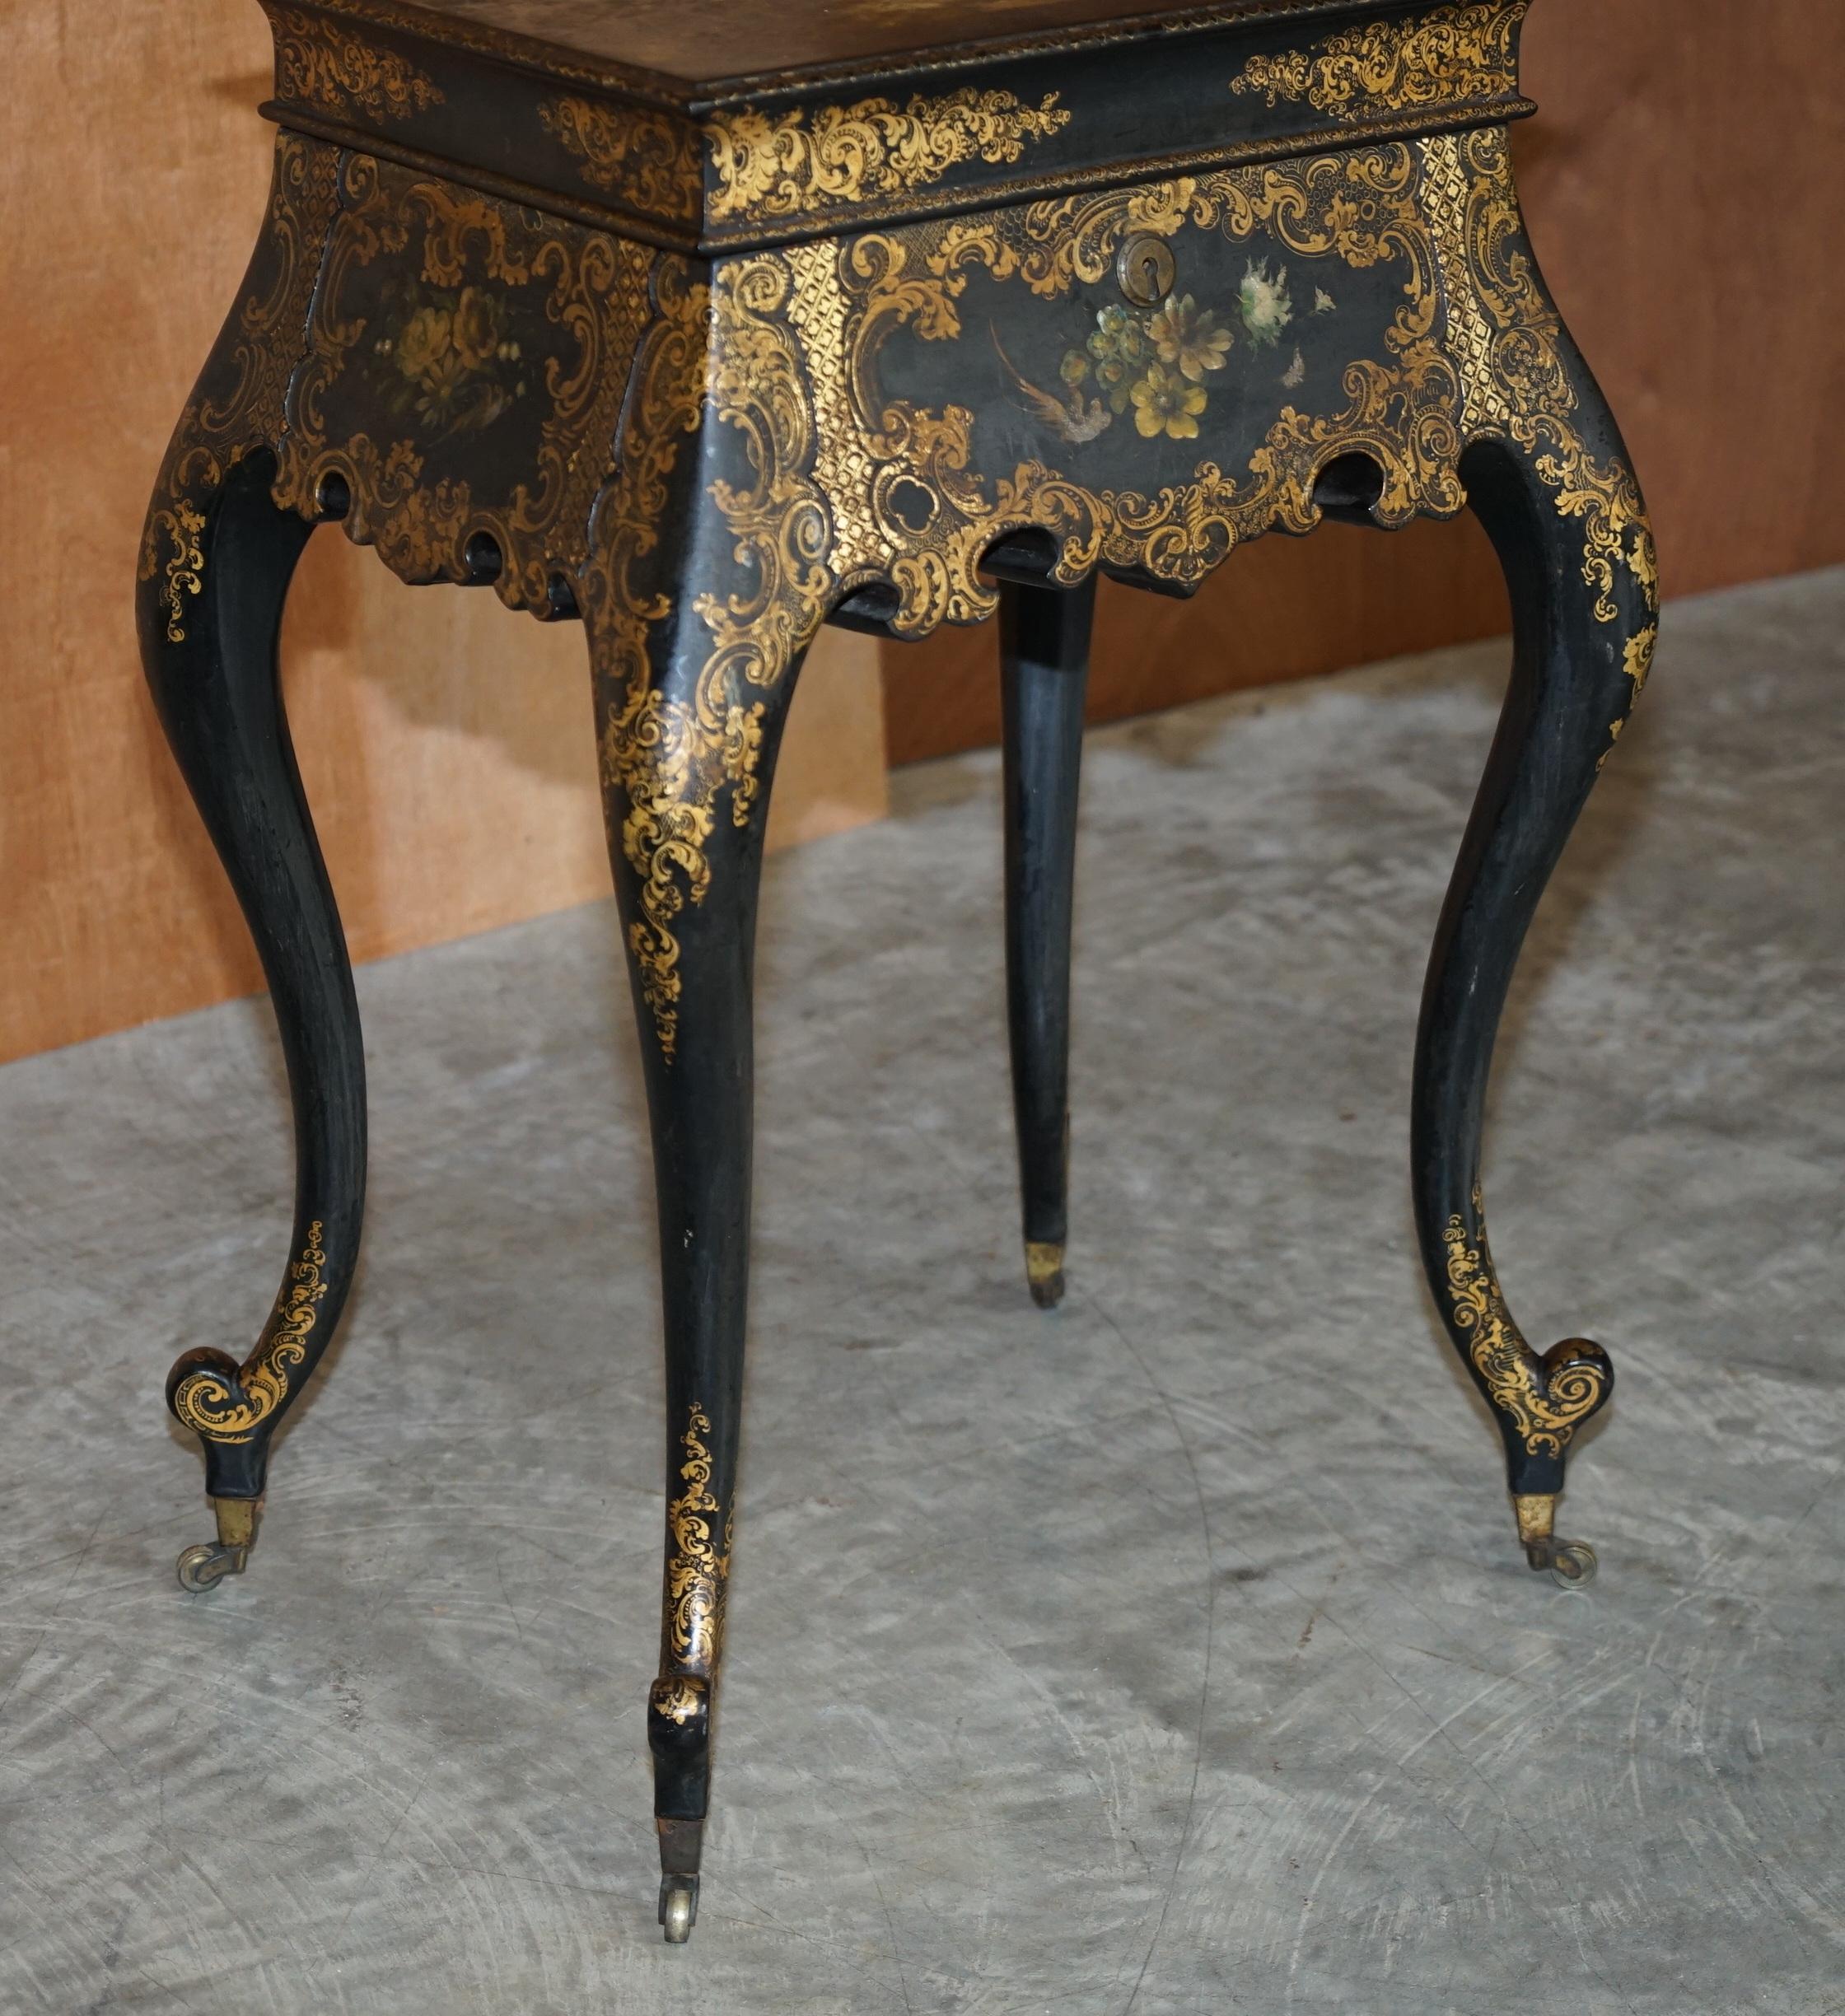 Wood Georgian Antique circa 1800 George III Chinese Lacquer & Gold Gilt Work Table For Sale